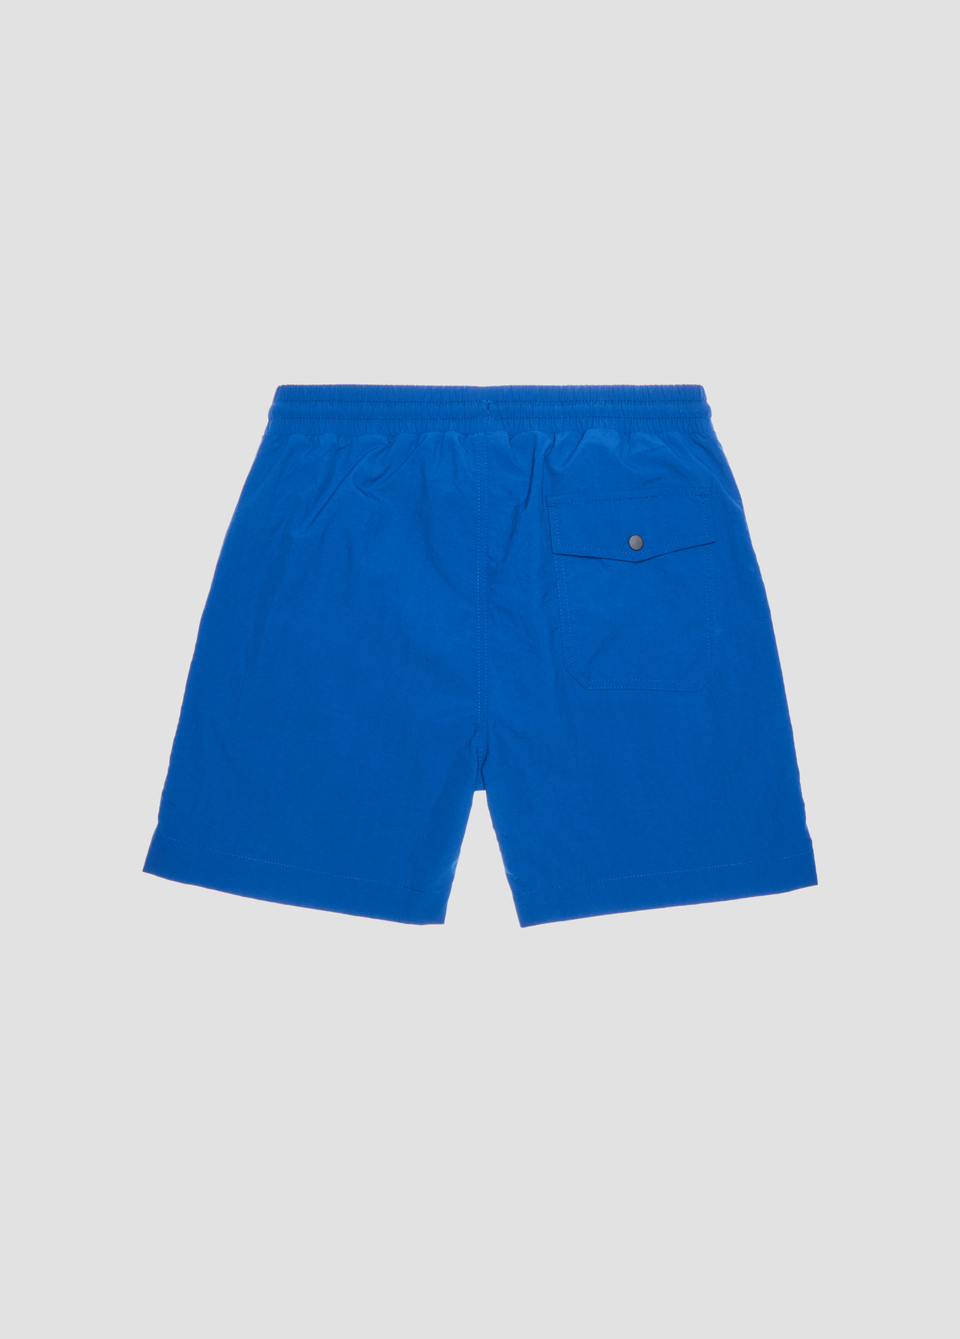 REGULAR FIT SWIMMING TRUNKS IN TECHNICAL FABRIC WITH LOGO PATCH - Antony Morato Online Shop